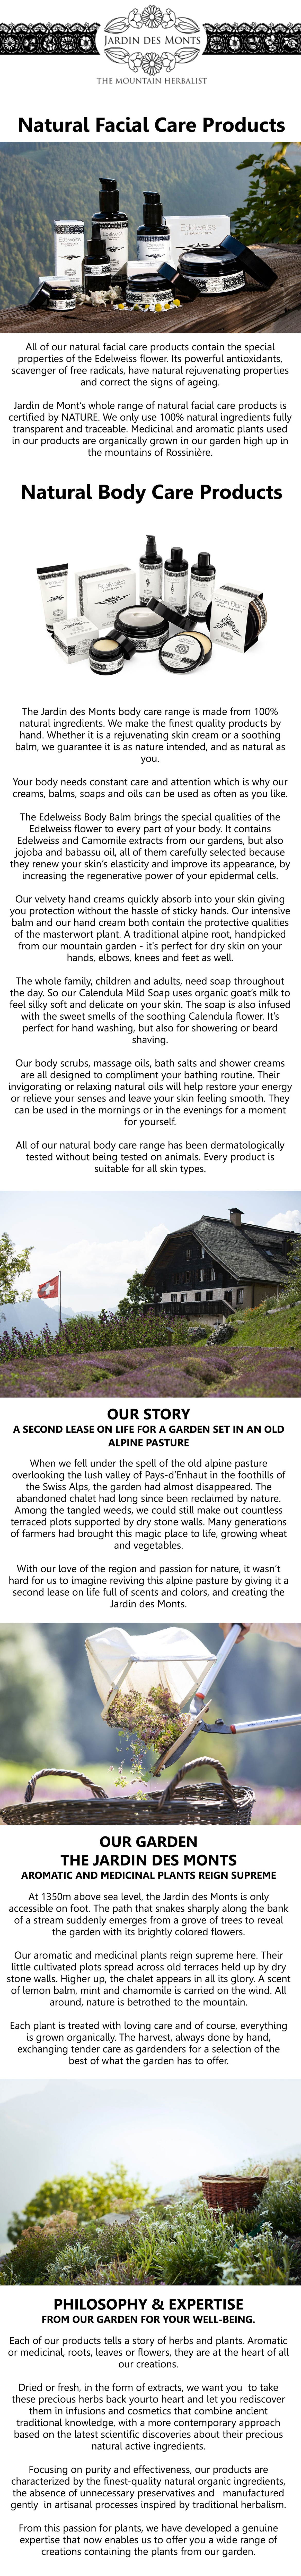 Jardin des monts Story of naturlal beauty products| Switzerluxe